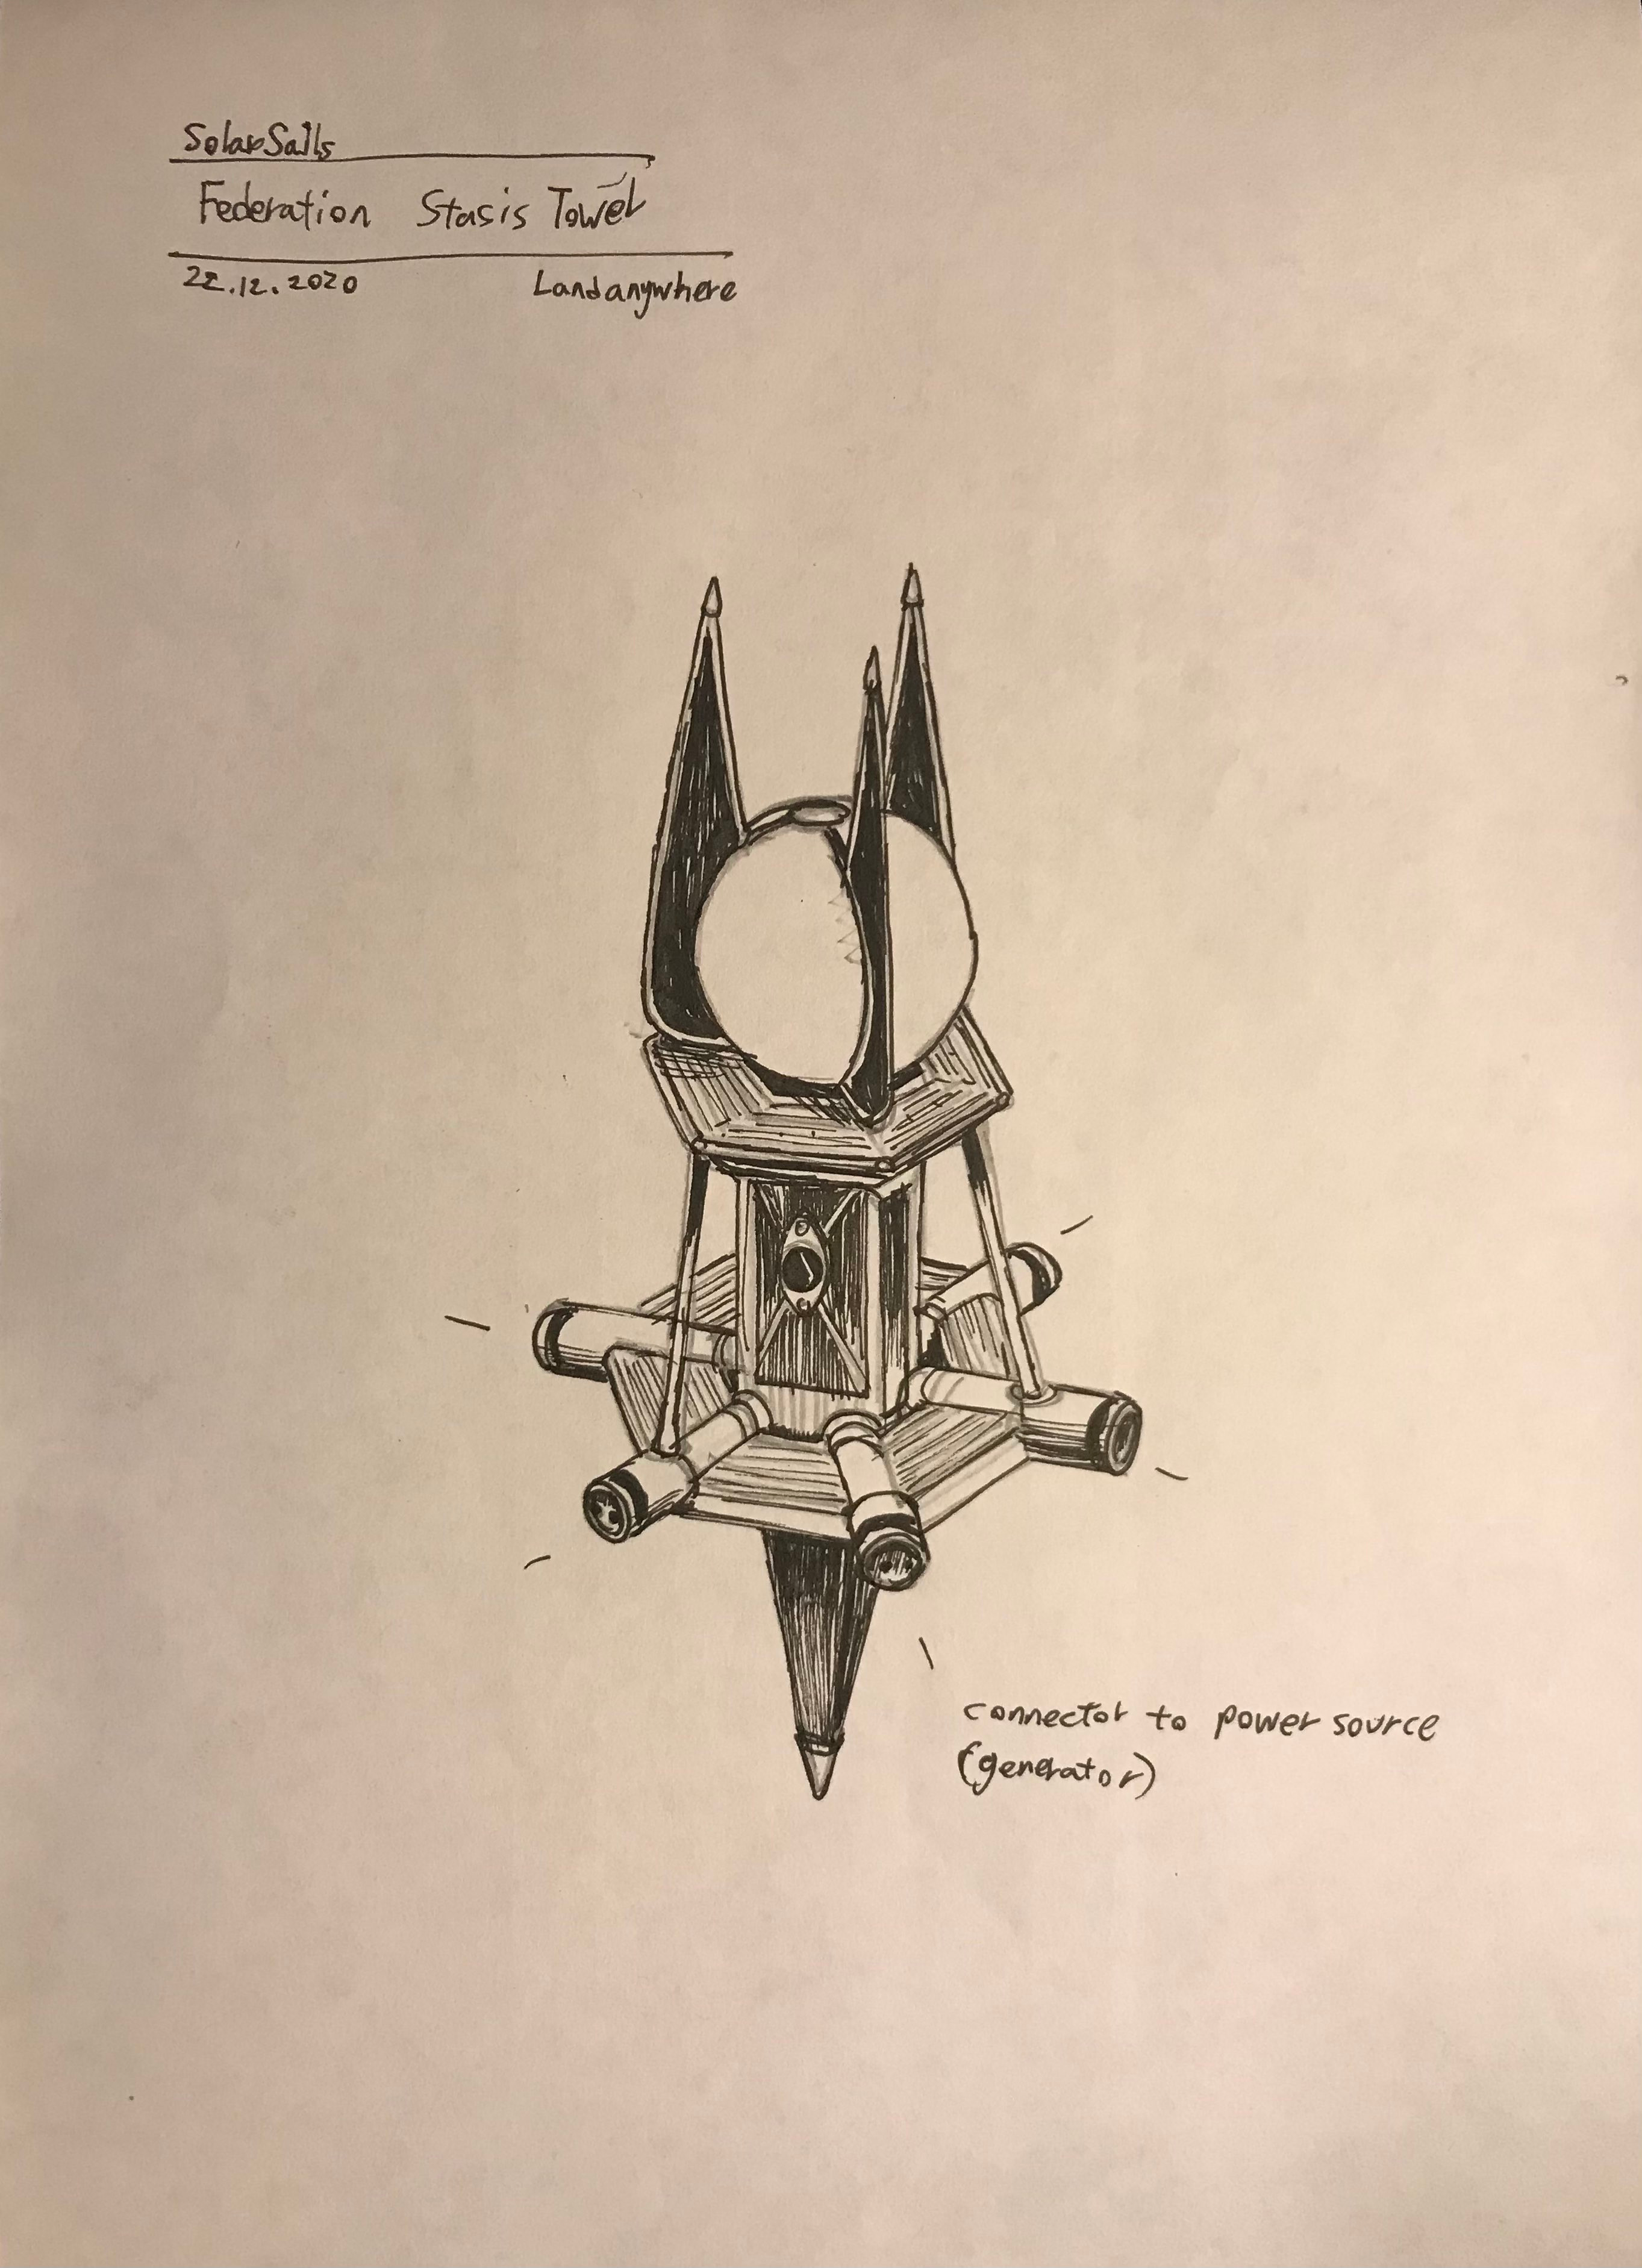 An advanced sketch of the stasis tower.